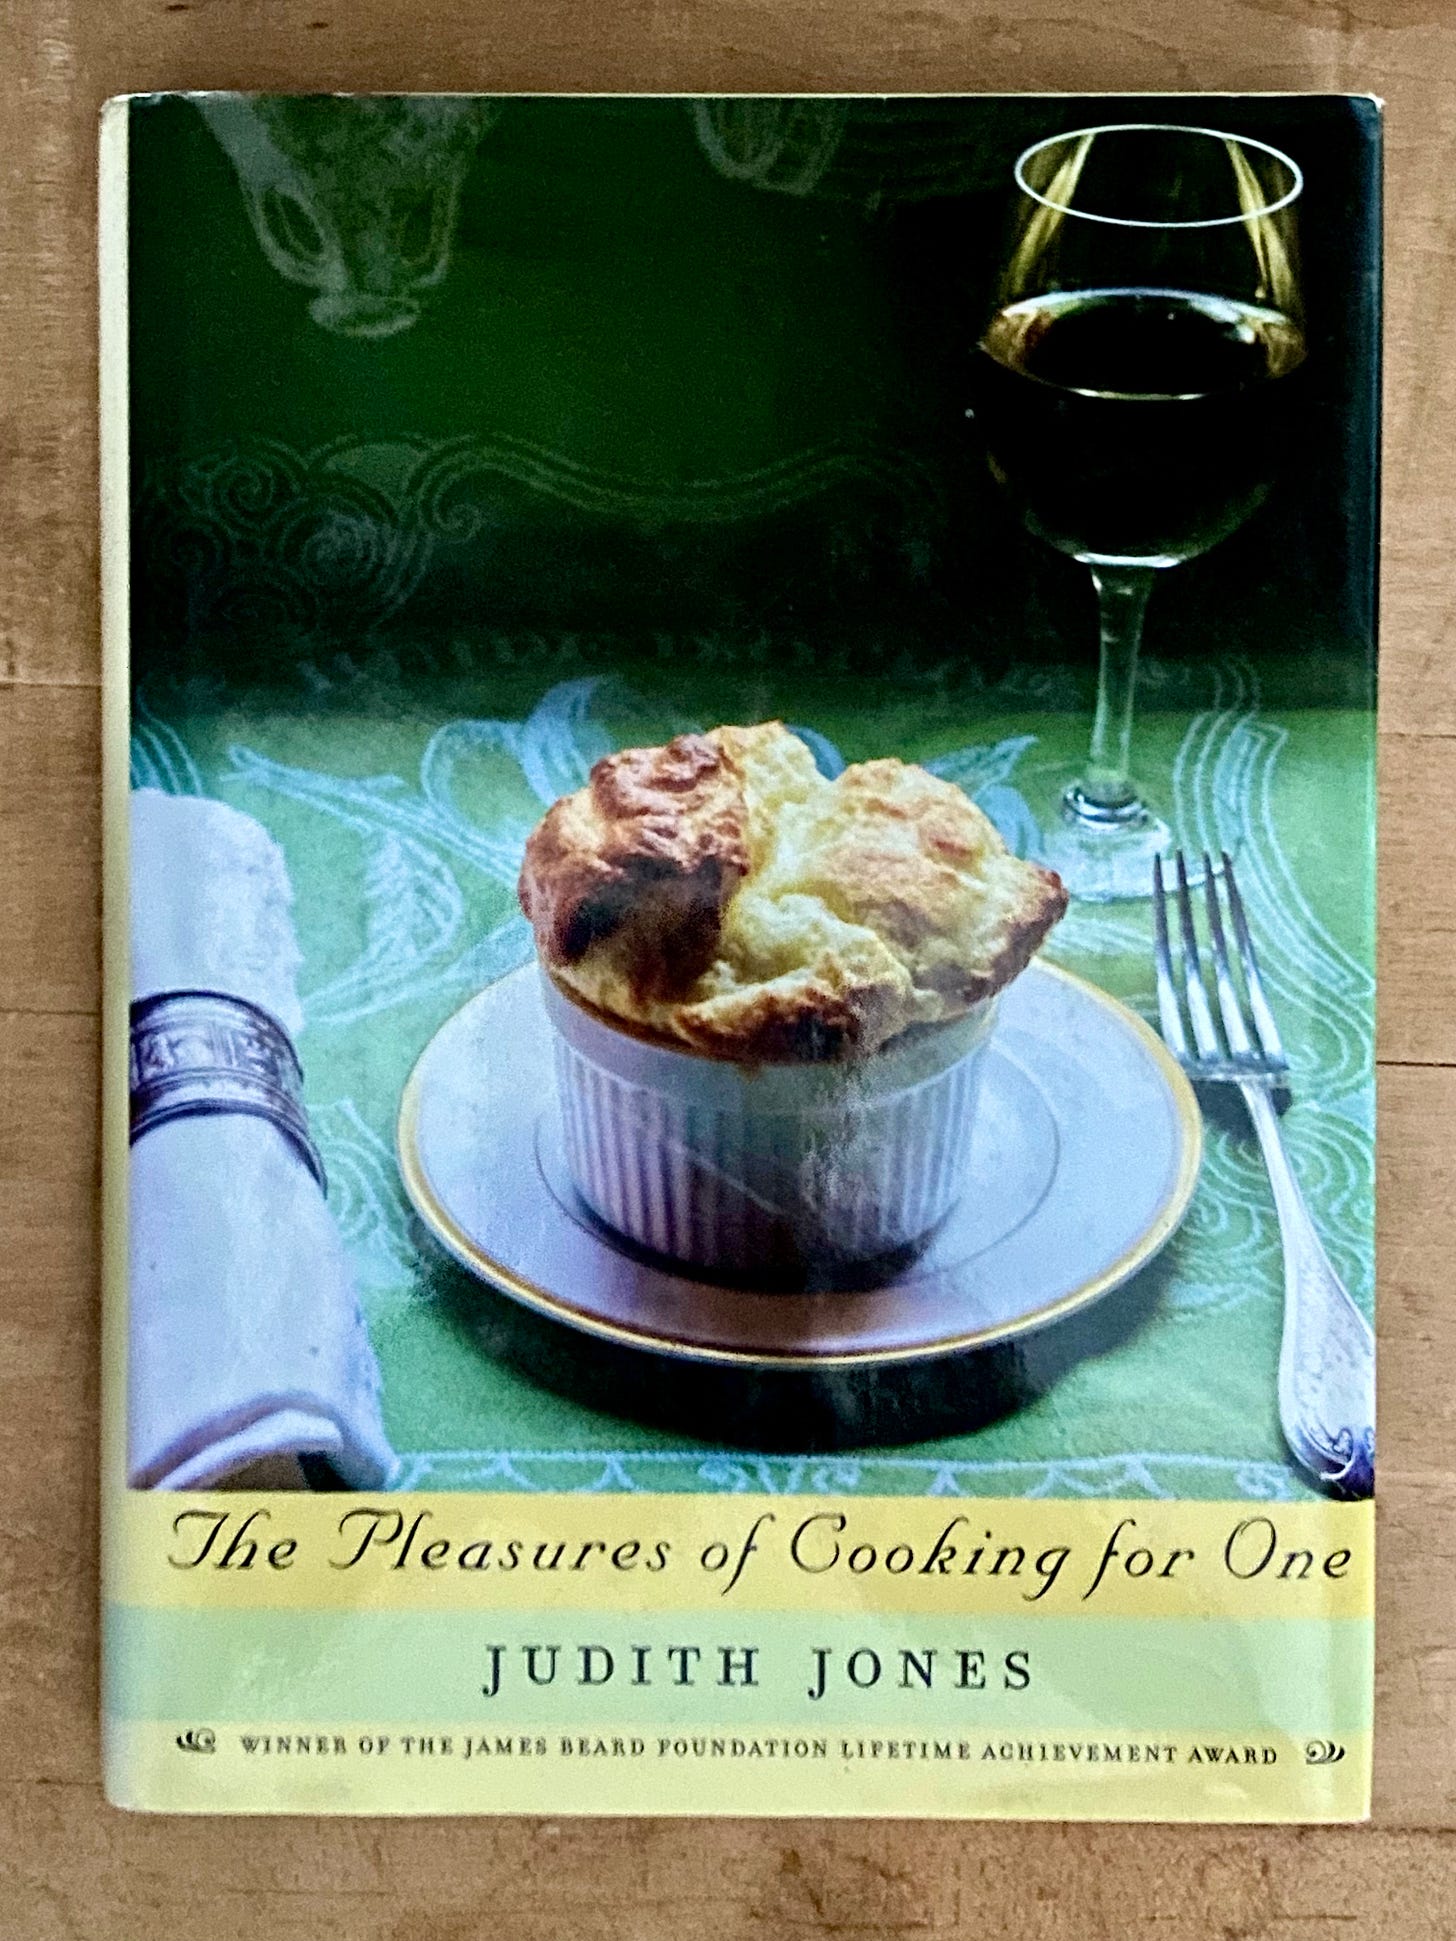  The Pleasures of Cooking for One by Judith Jones